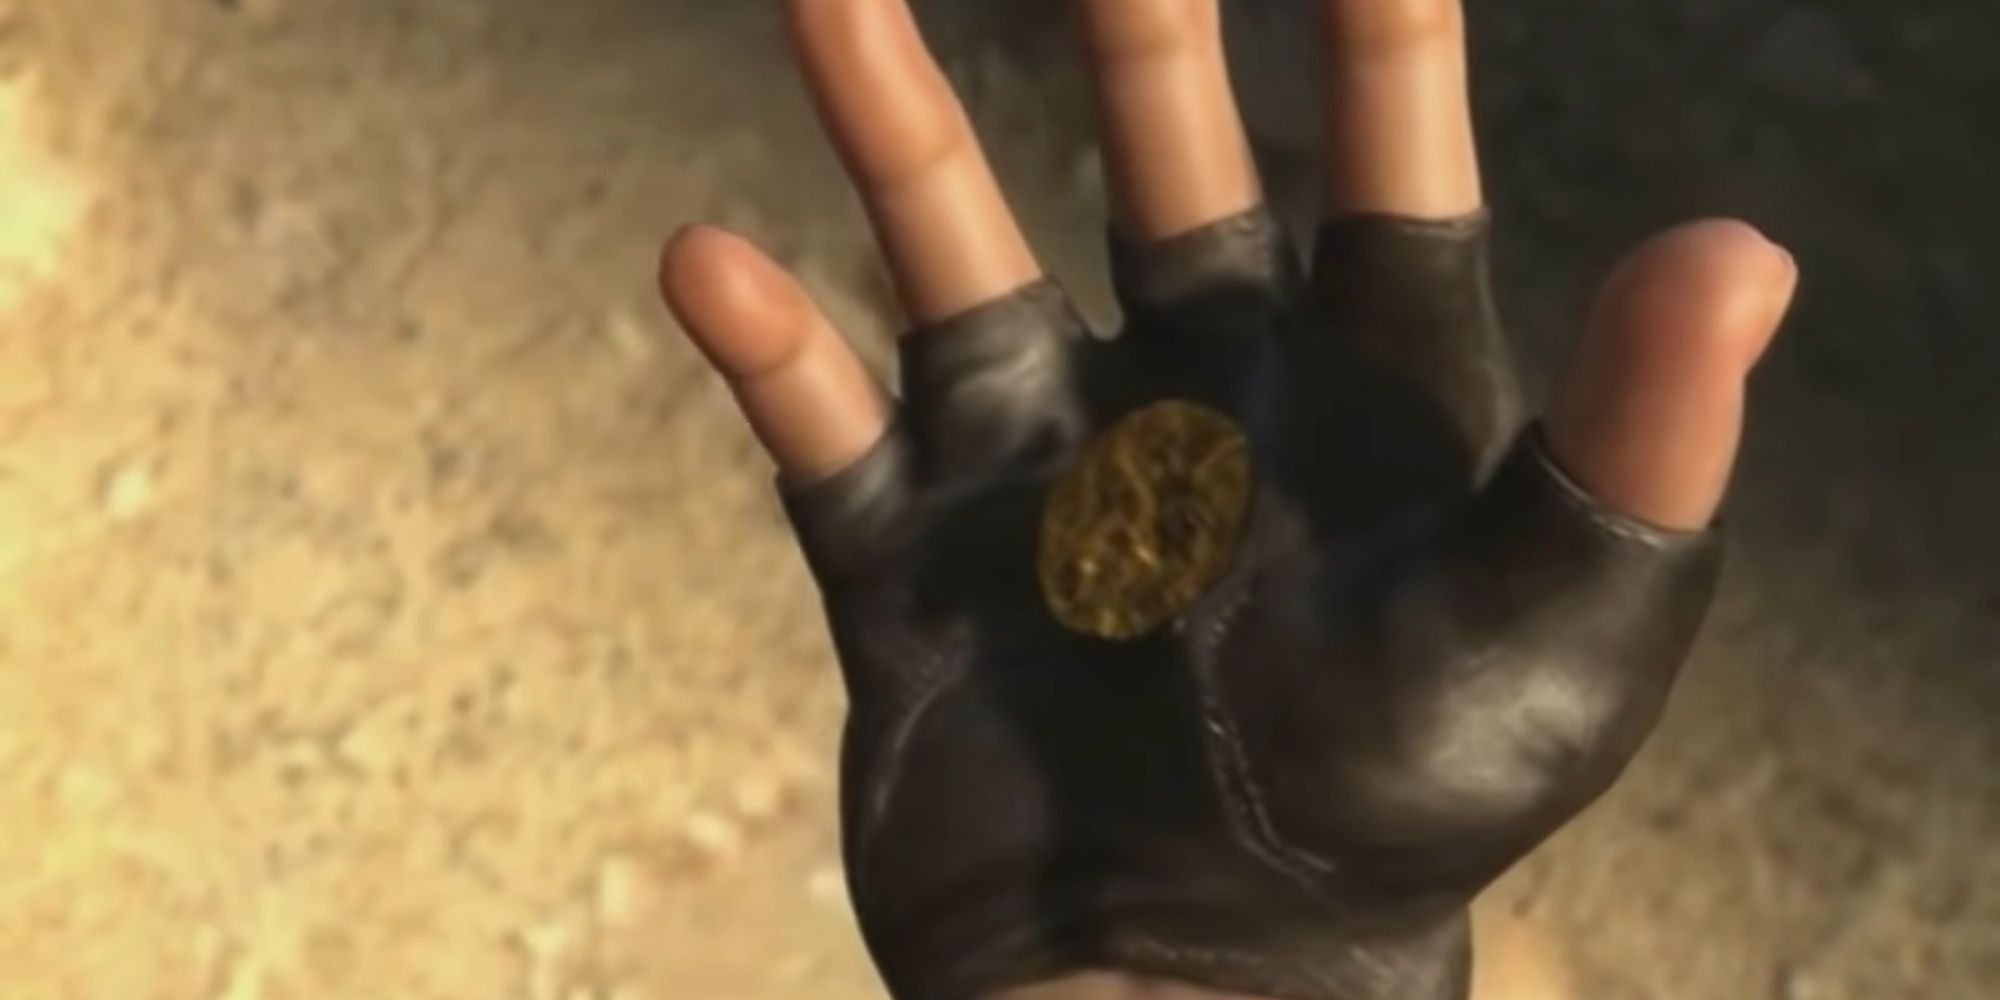 Stalker: A Gold Coin In The Cinematic Showing The Greed Ending